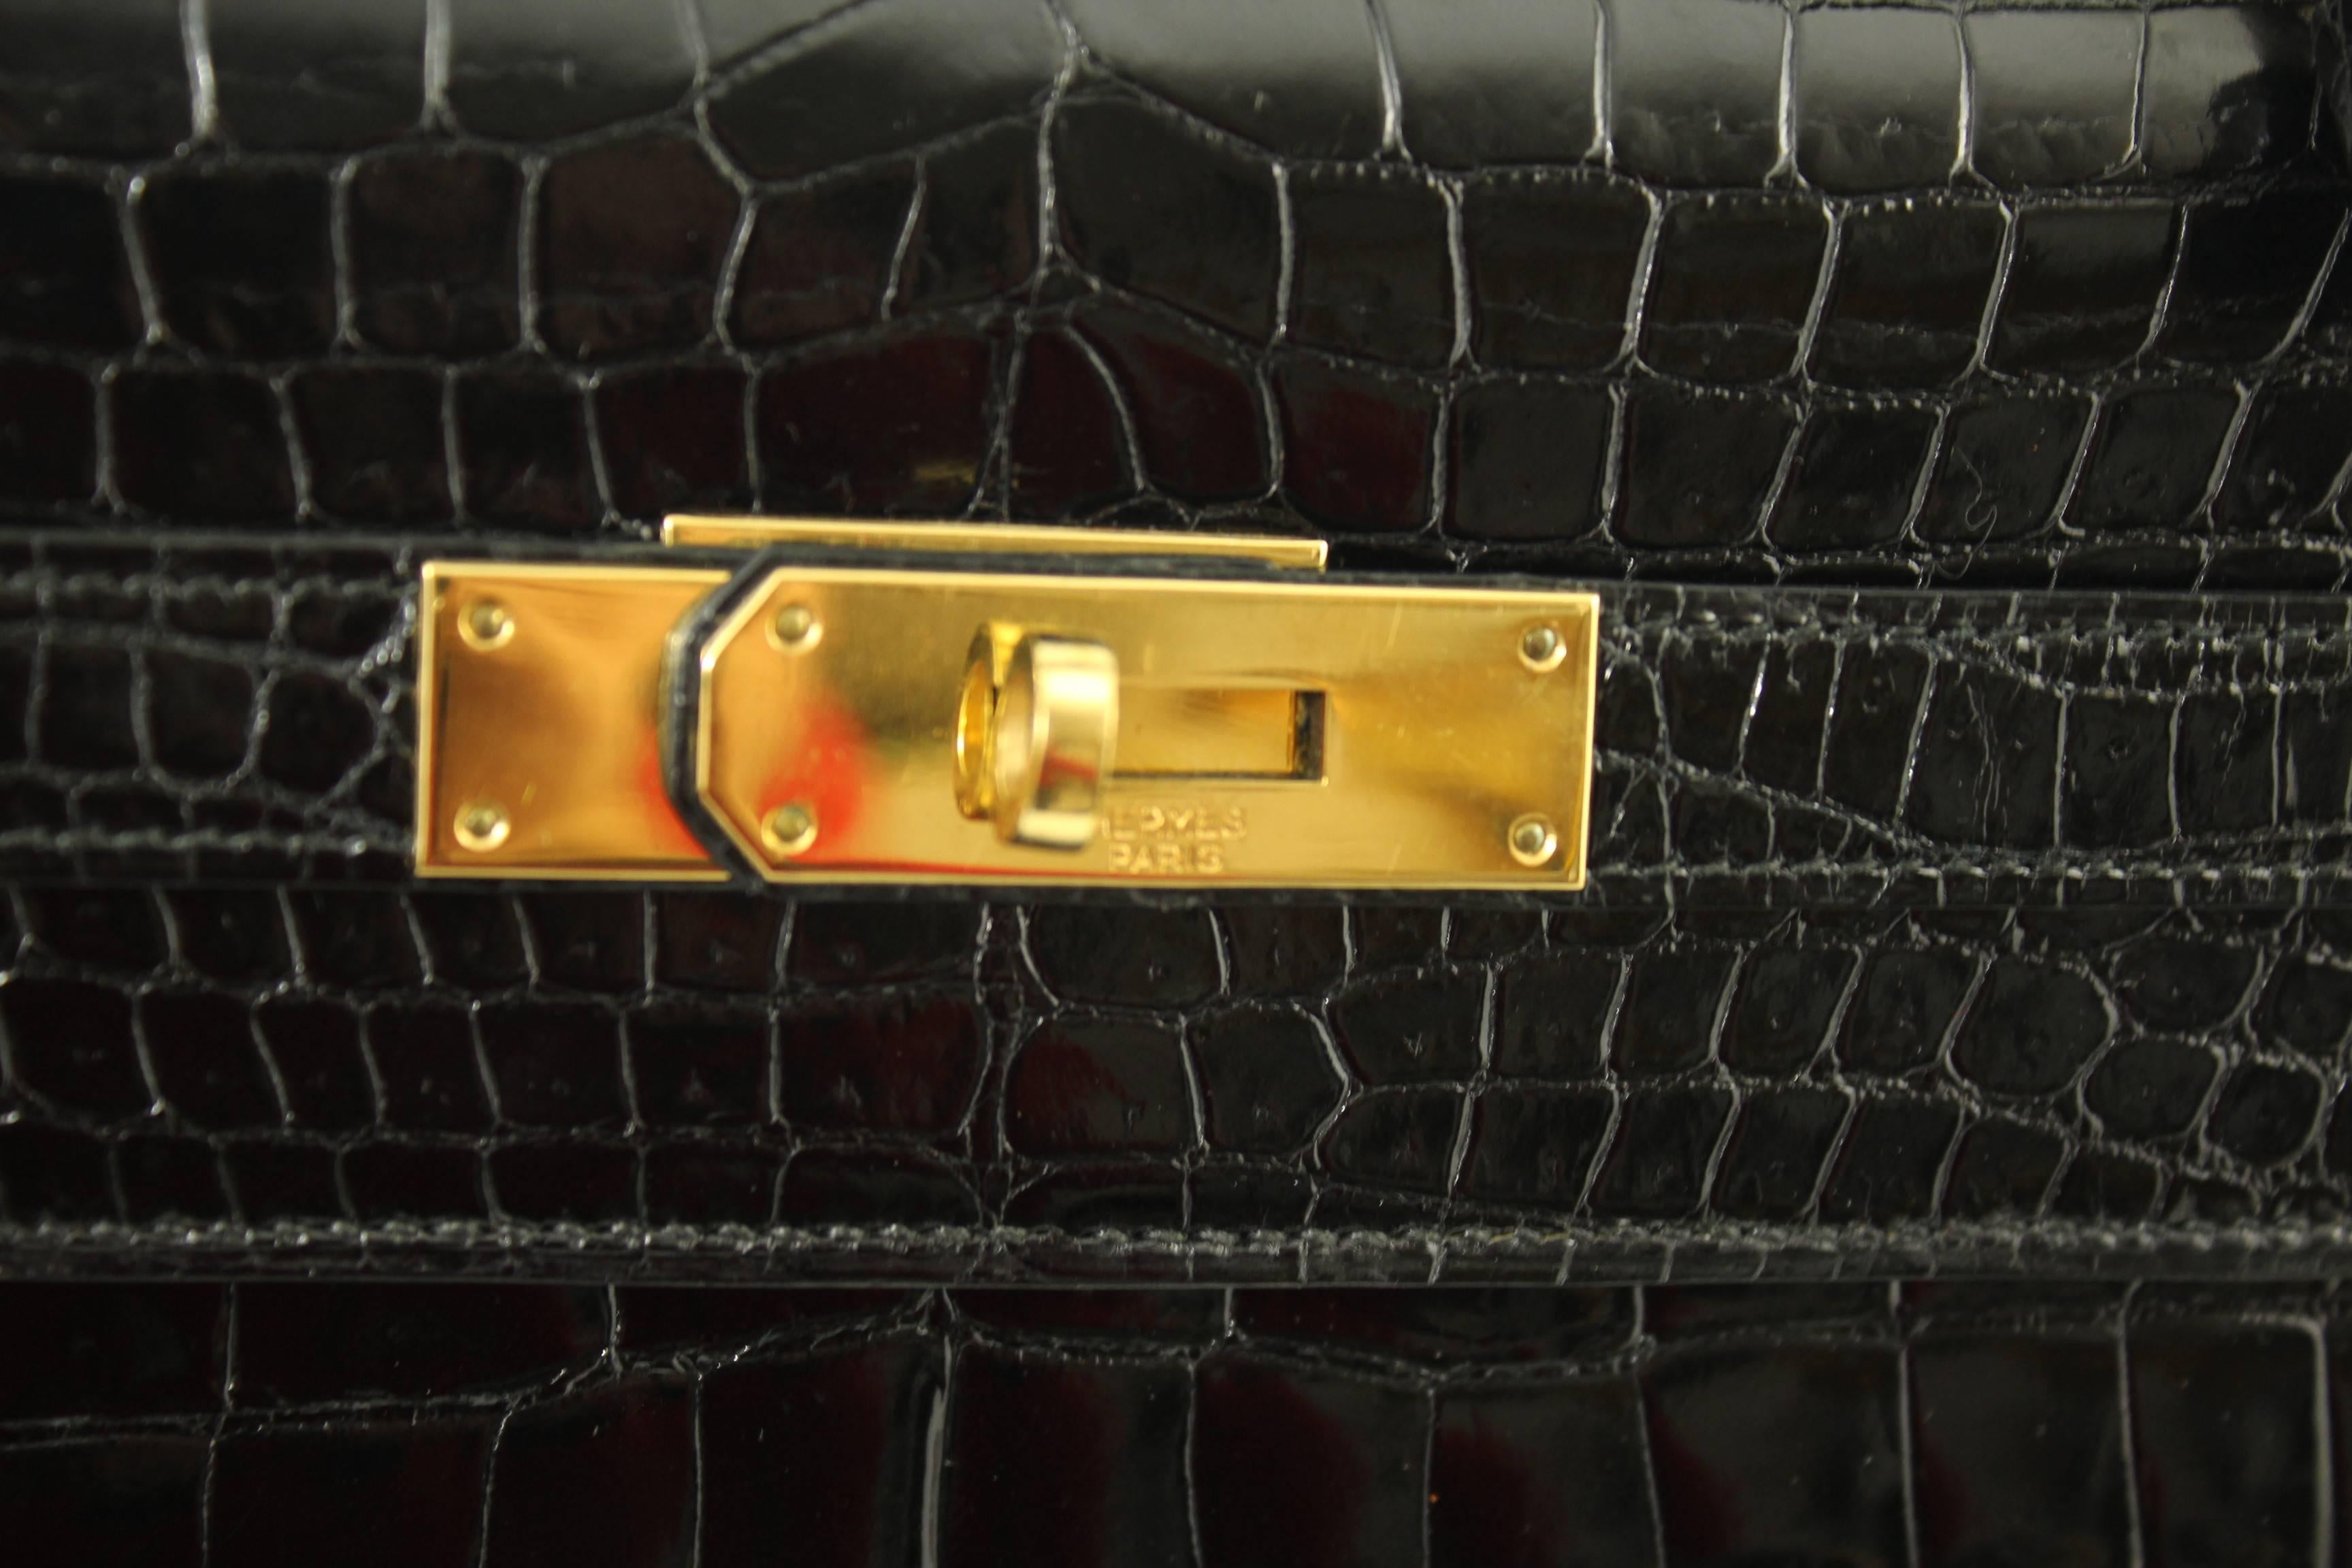 Nice and in excellent condition Hermes Kelly croco with golden hardware.
Size 32
Year: E in a circle so 1975
Condition: excellent
Sold with dust bag, keys , clochette and lock